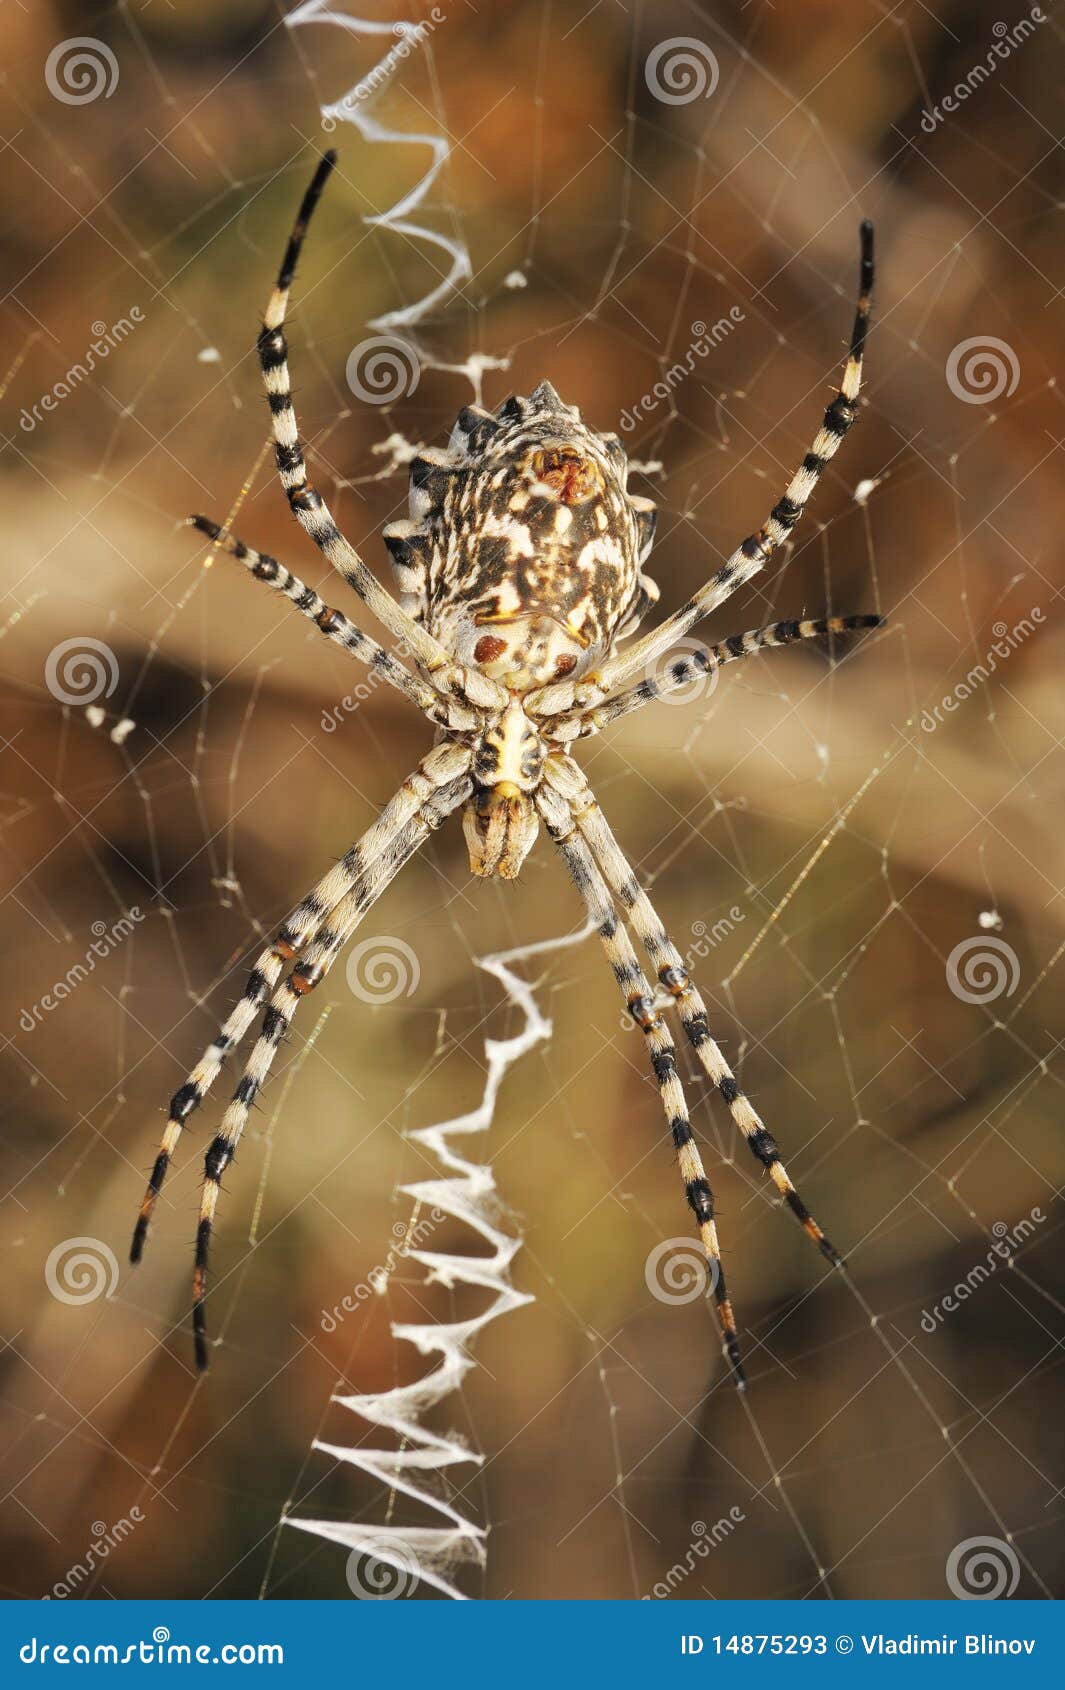 spider argiope lobed on the web